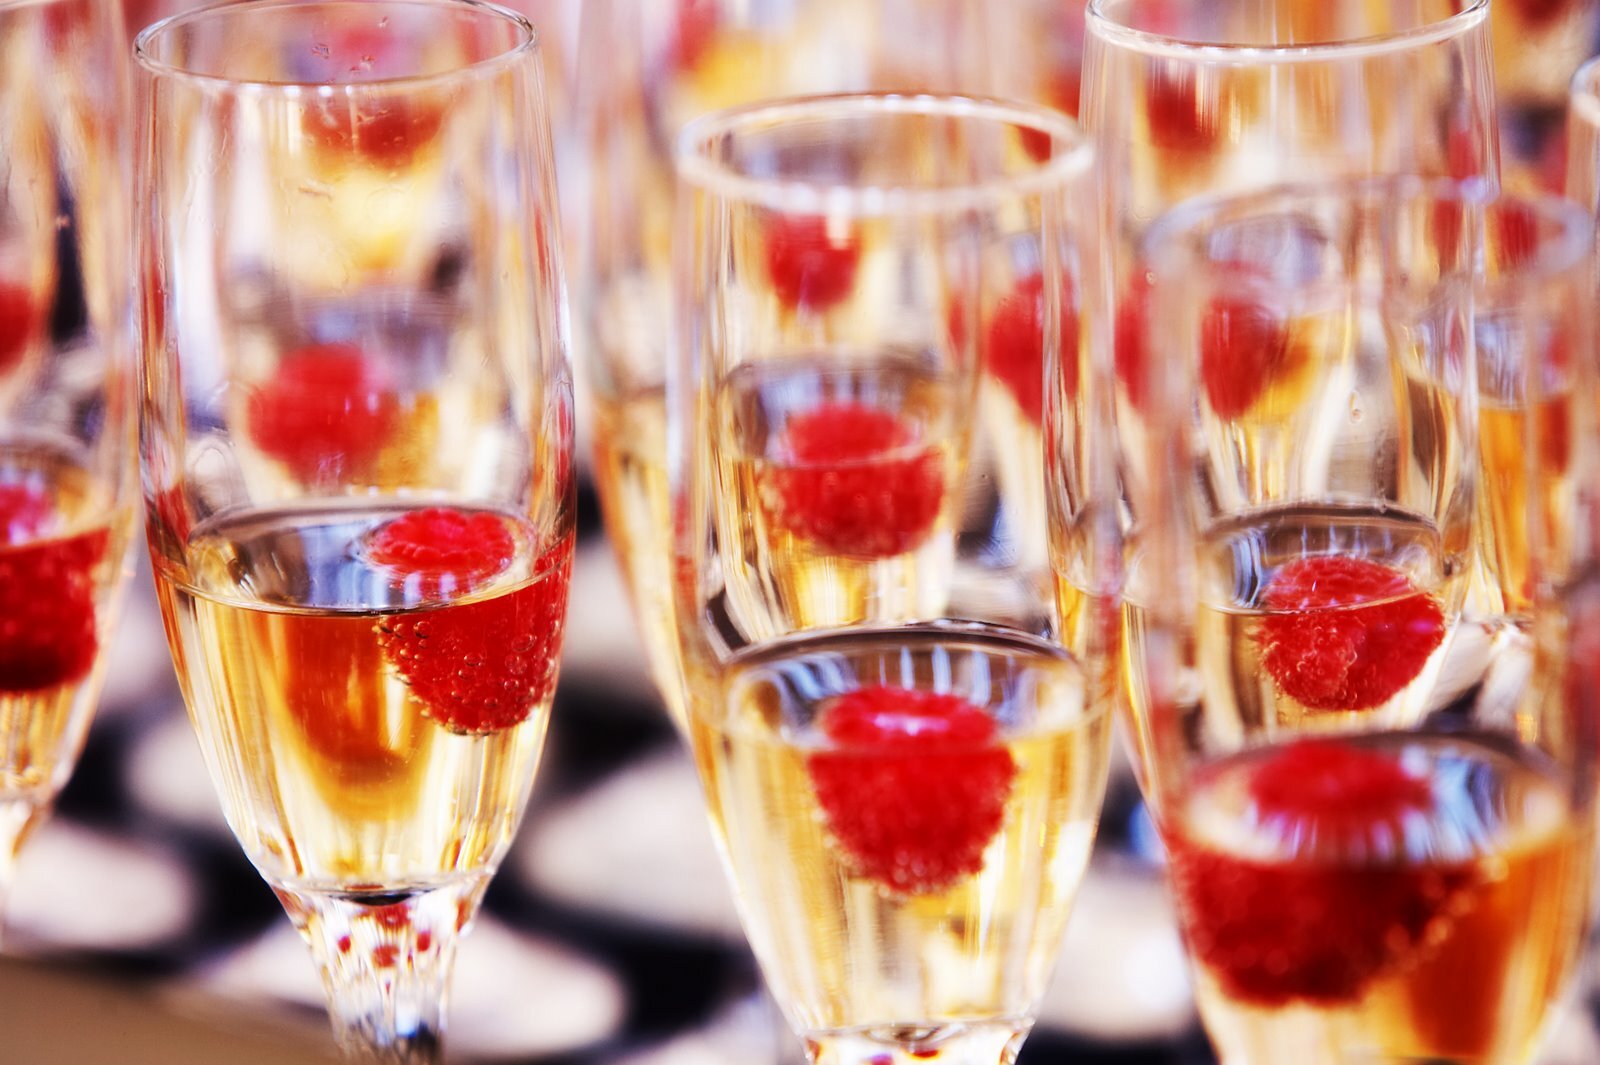 Do's and Dont's when hosting a direct sales party.